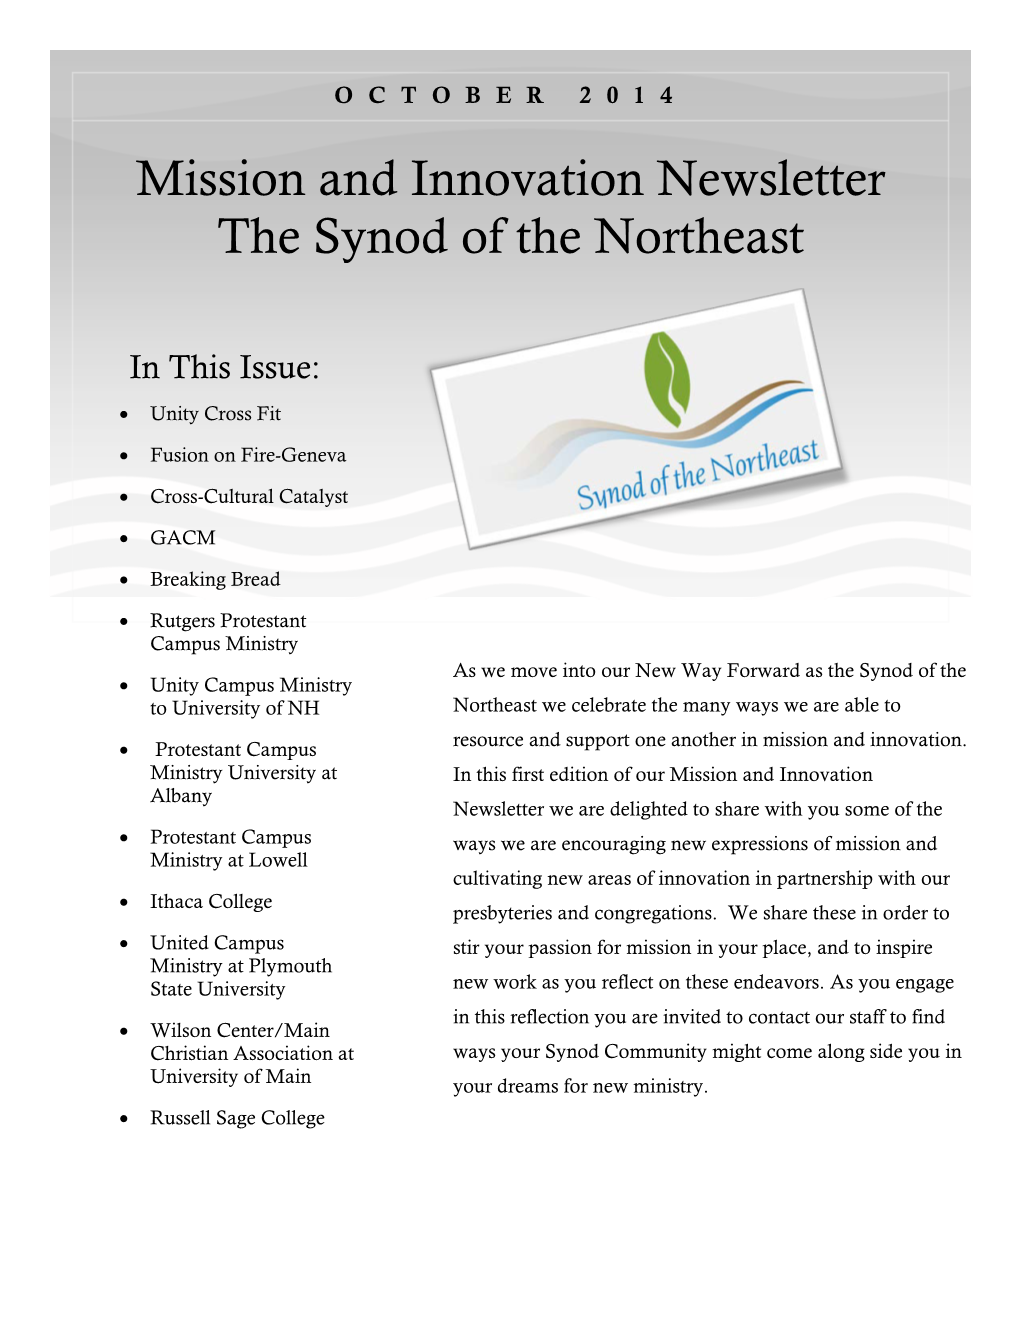 Mission and Innovation Newsletter the Synod of the Northeast